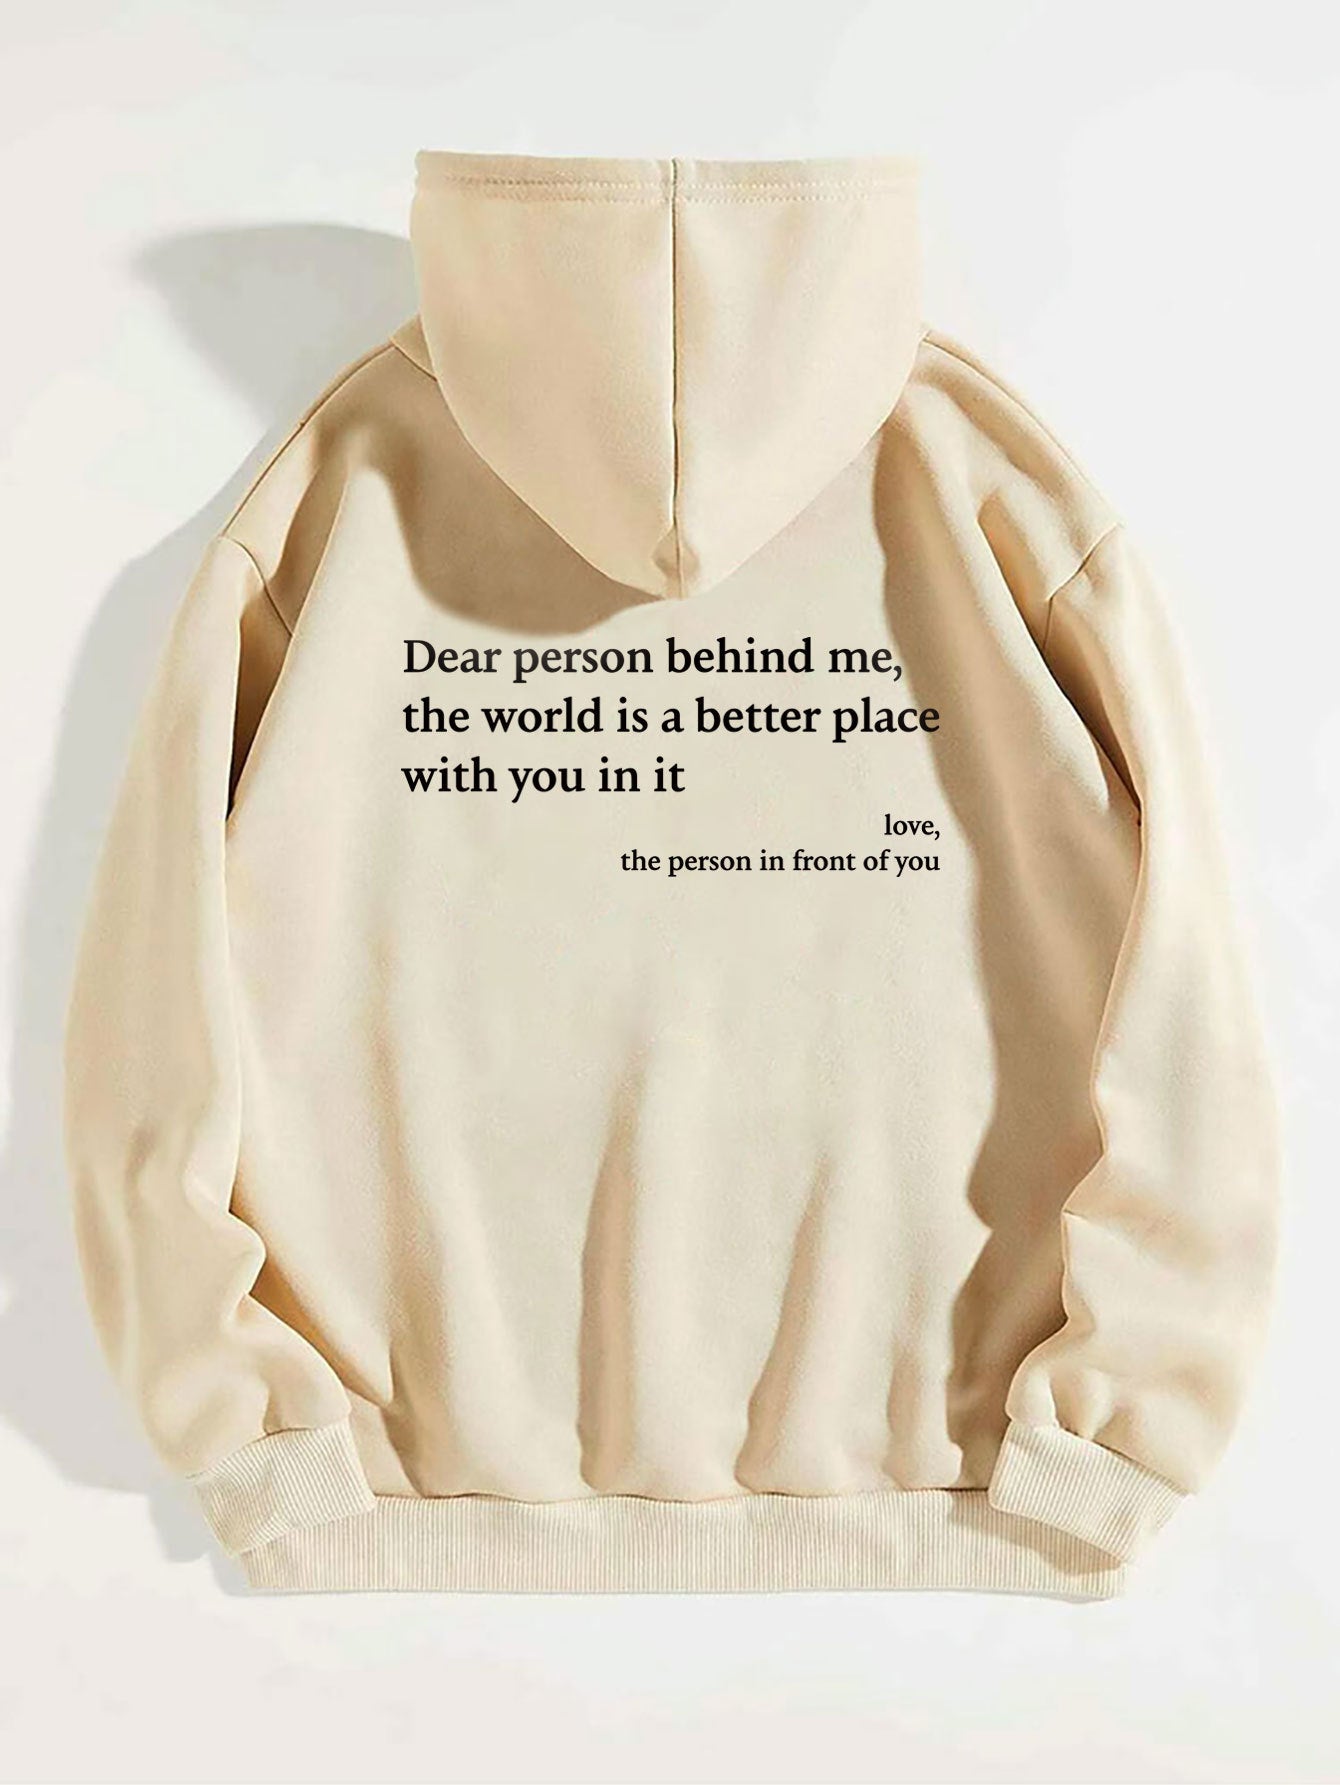 Dear person behind me! Inspirational hoodie